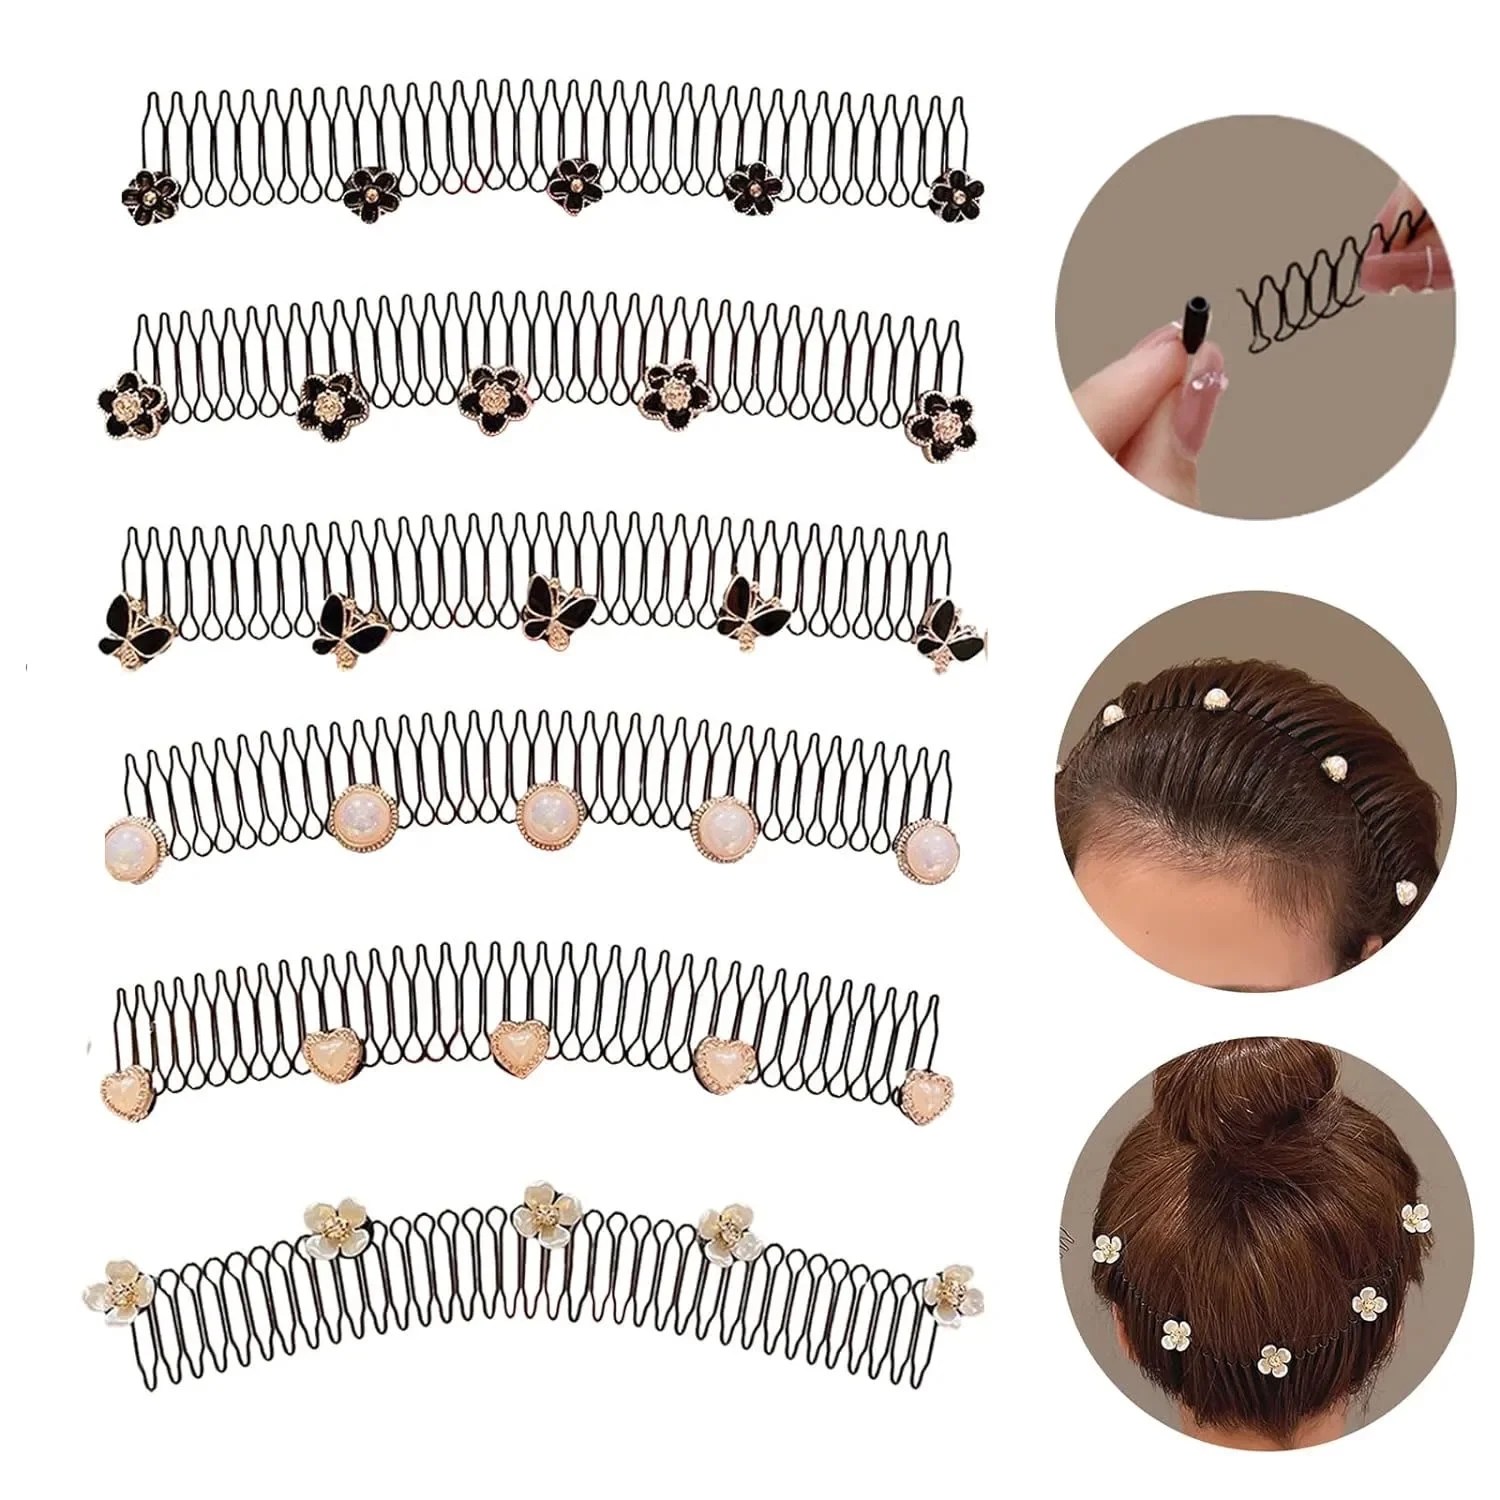 

Women Invisible Broken Hair Hairpin Adult Tiara Tools Roll Curve Needle Bangs Fixed Insert Comb Professional Styling Accessories